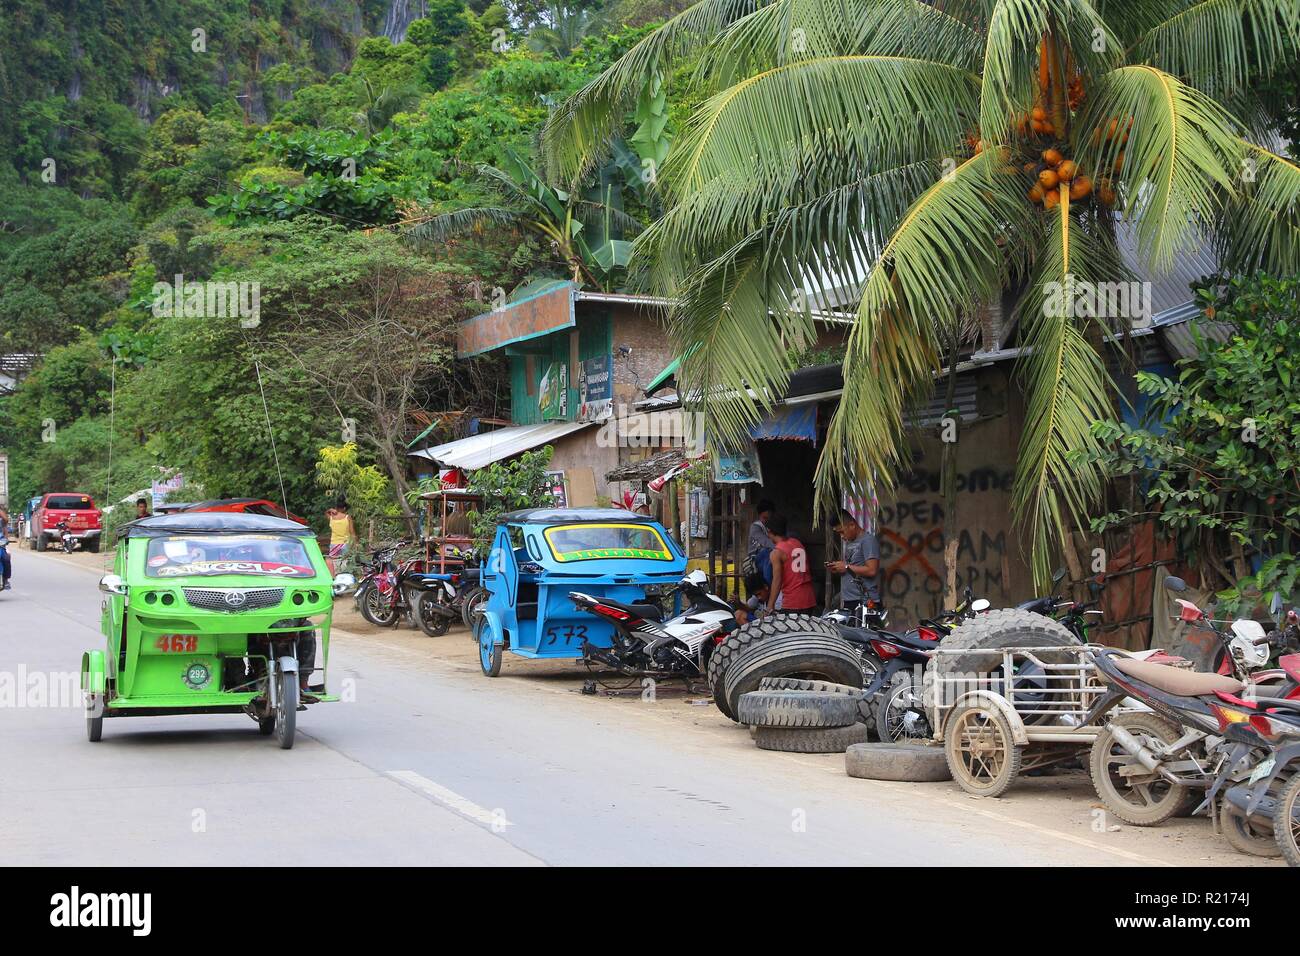 PALAWAN, PHILIPPINES - DECEMBER 4, 2017: Tourists ride tricycle taxis in resort town of El Nido in Palawan island, Philippines. 6 million foreign tour Stock Photo